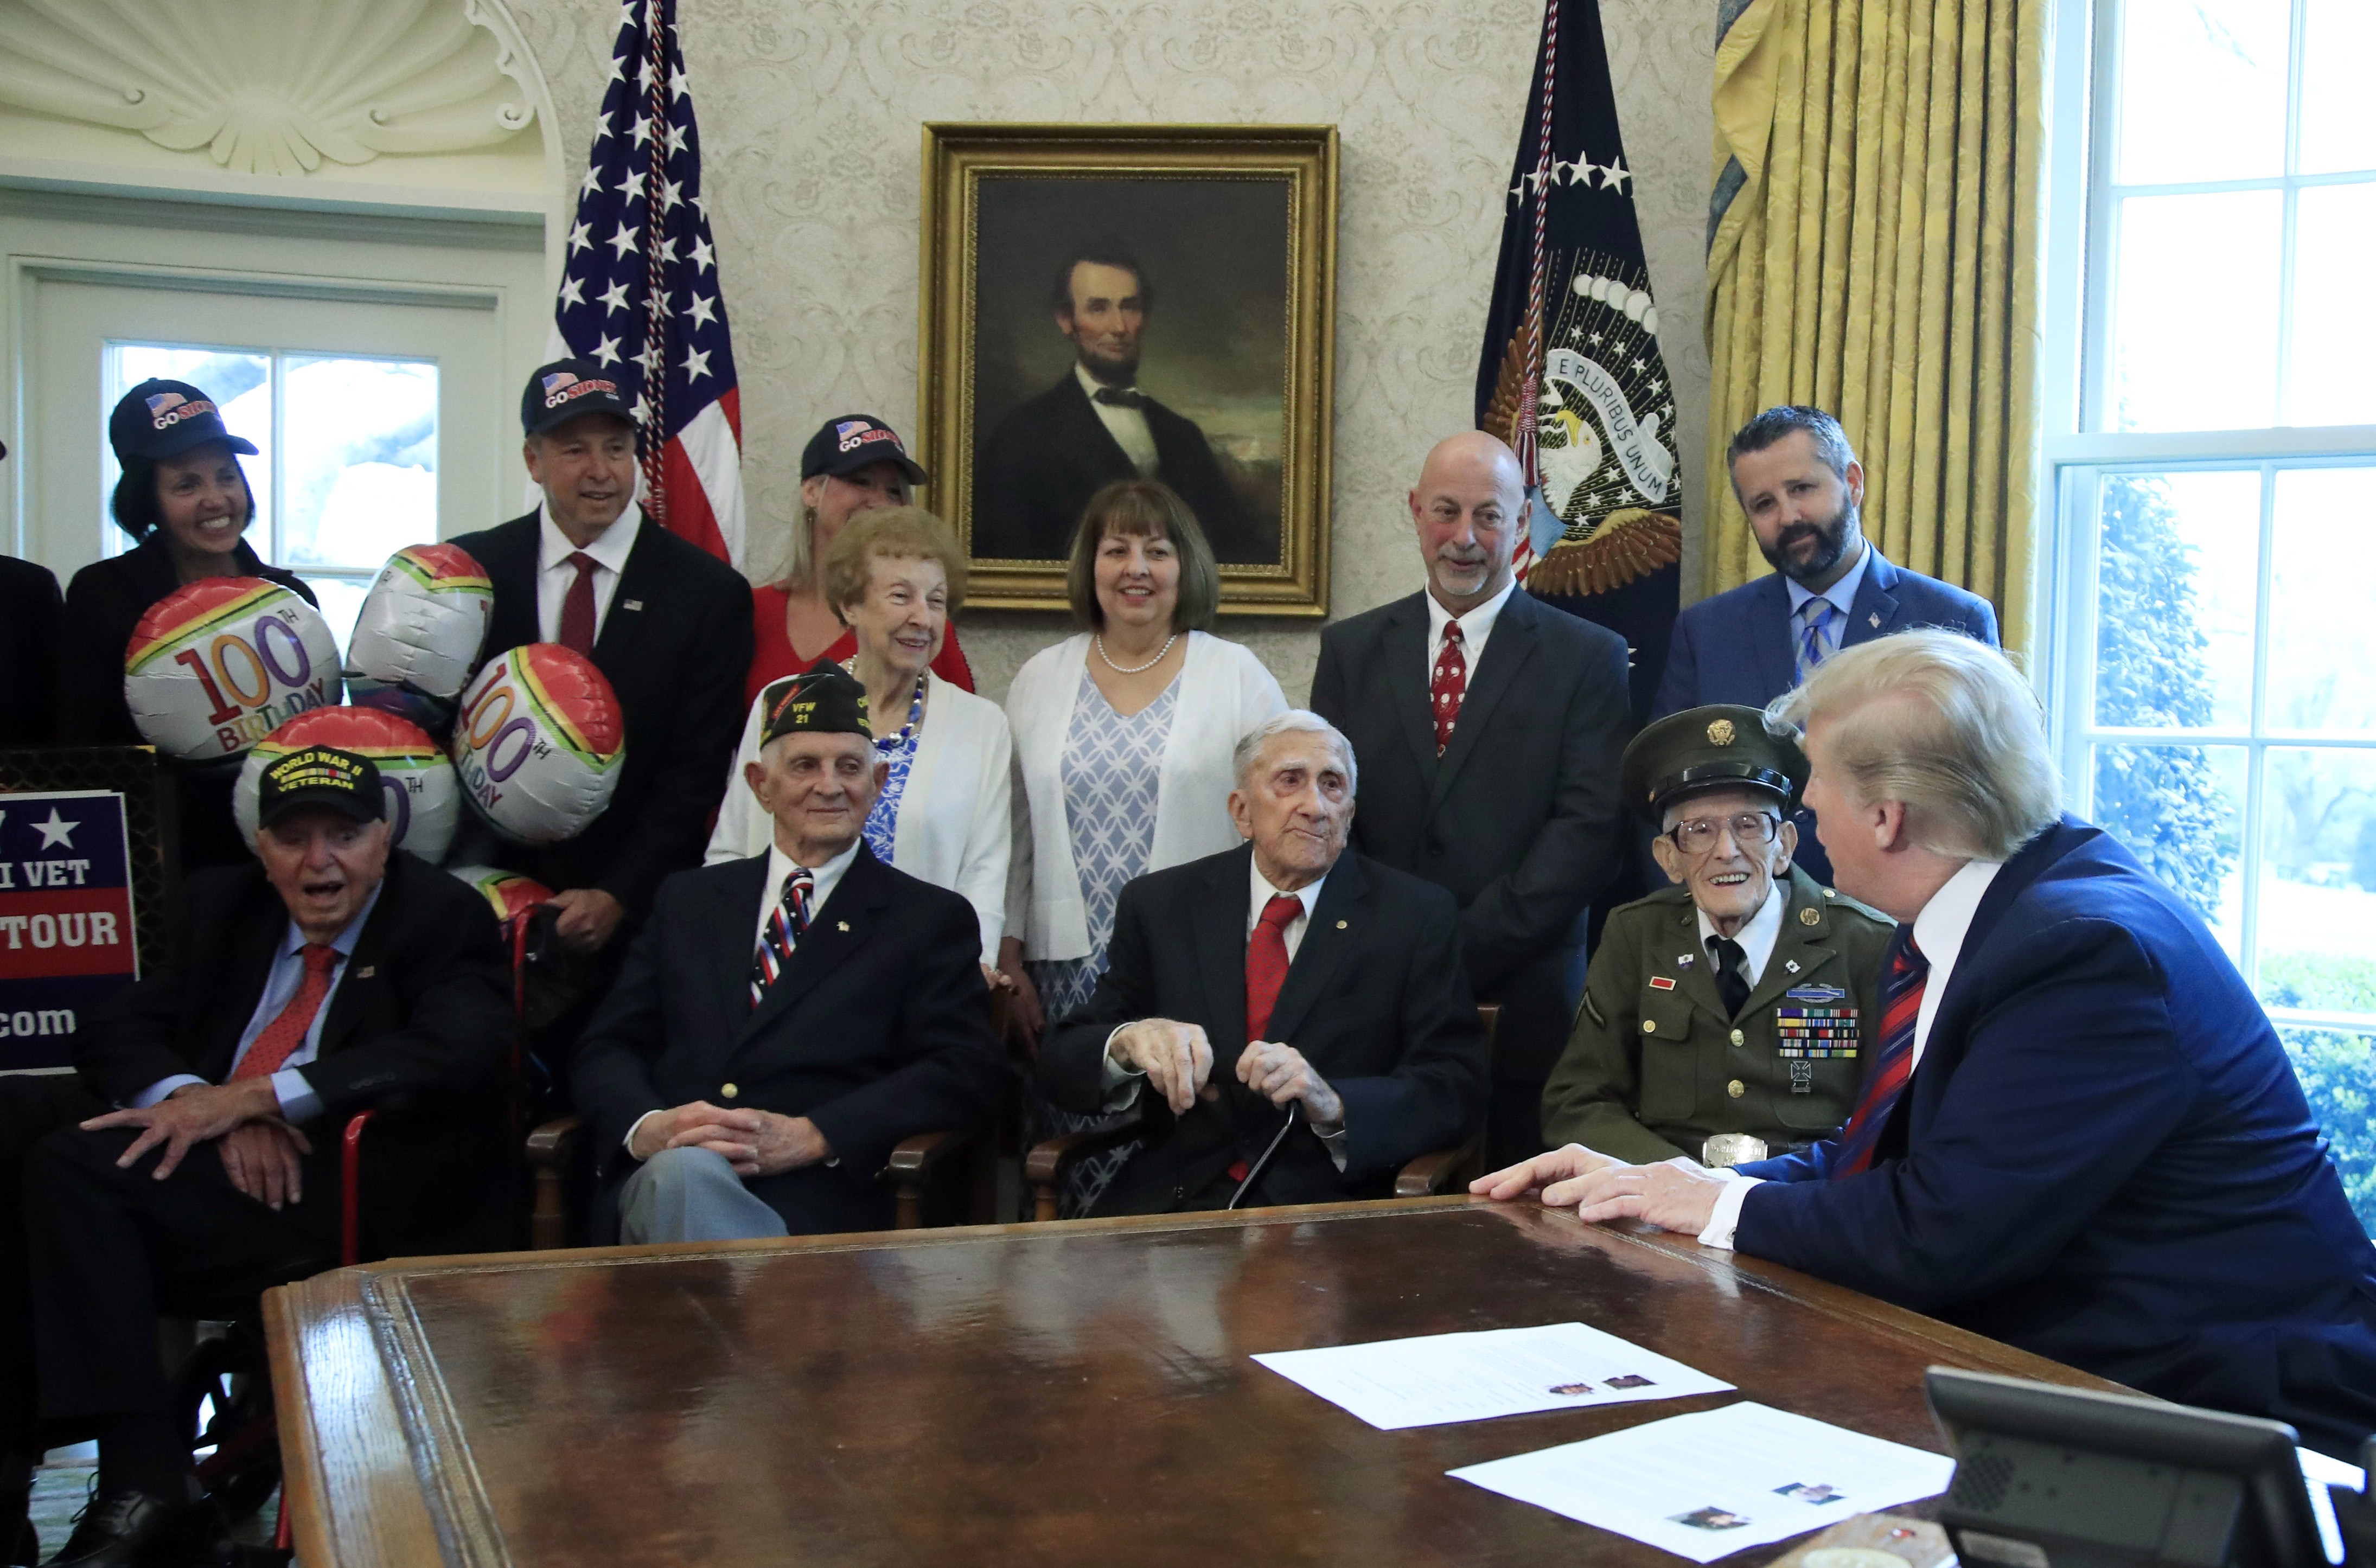 President Donald Trump is joined by World War II veterans, seated from left, Sidney Walton, Allen Jones, Paul Kriner and Floyd Wigfield, in the Oval Office of the White House in Washington, Thursday, April 11, 2019.